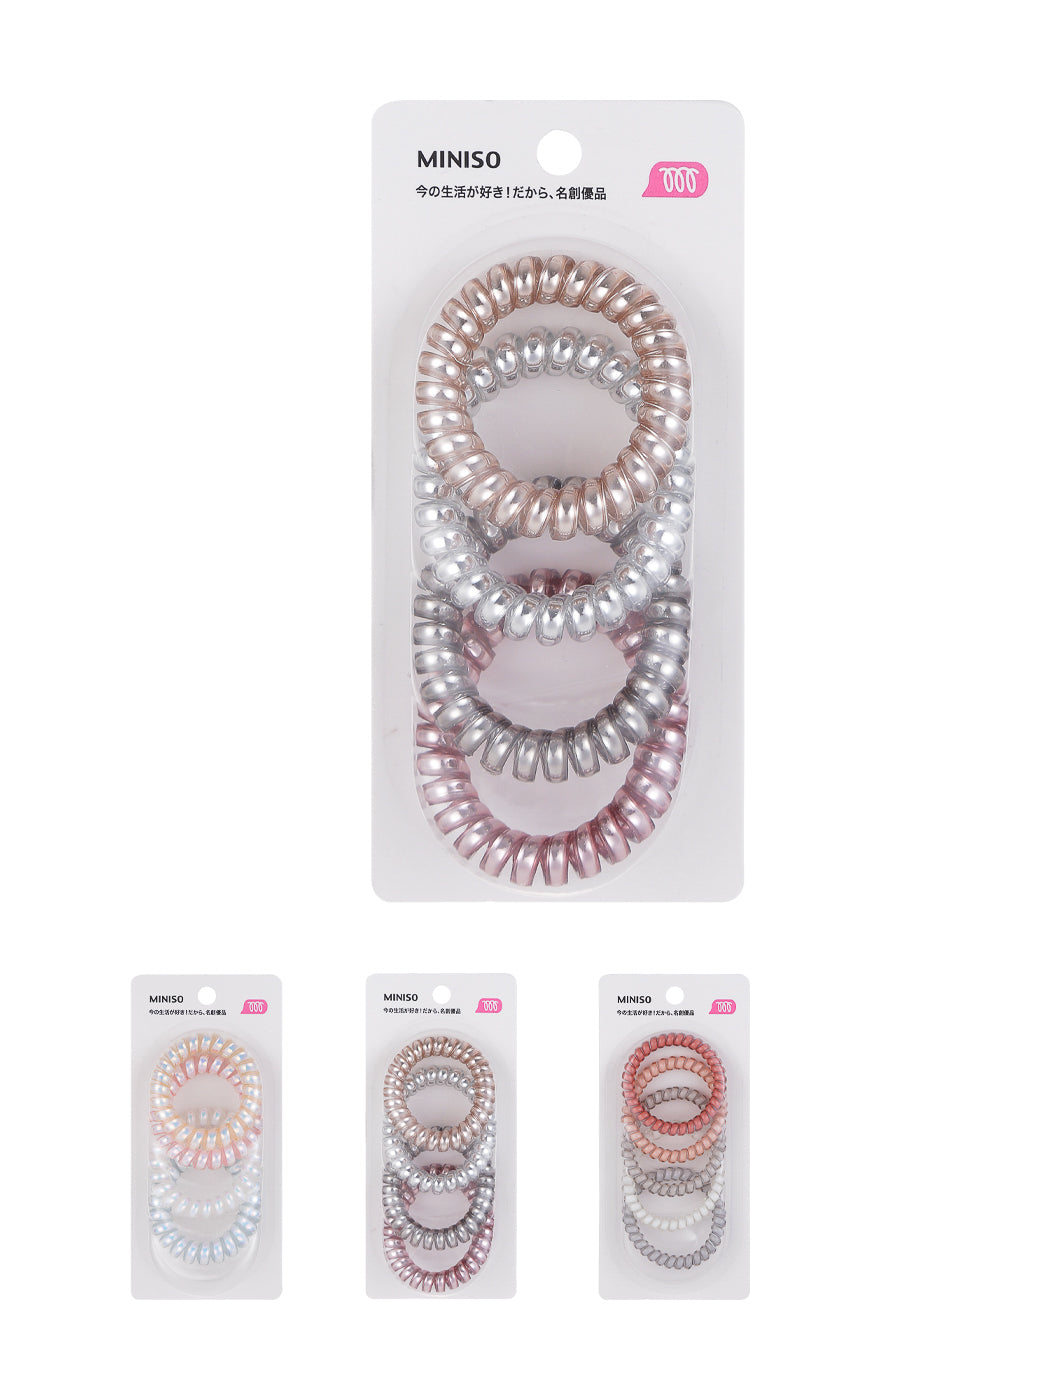 MINISO 5.5 COLORED SPIRAL HAIR TIES ( 4PCS ) 2007225210106 HAIR TIE